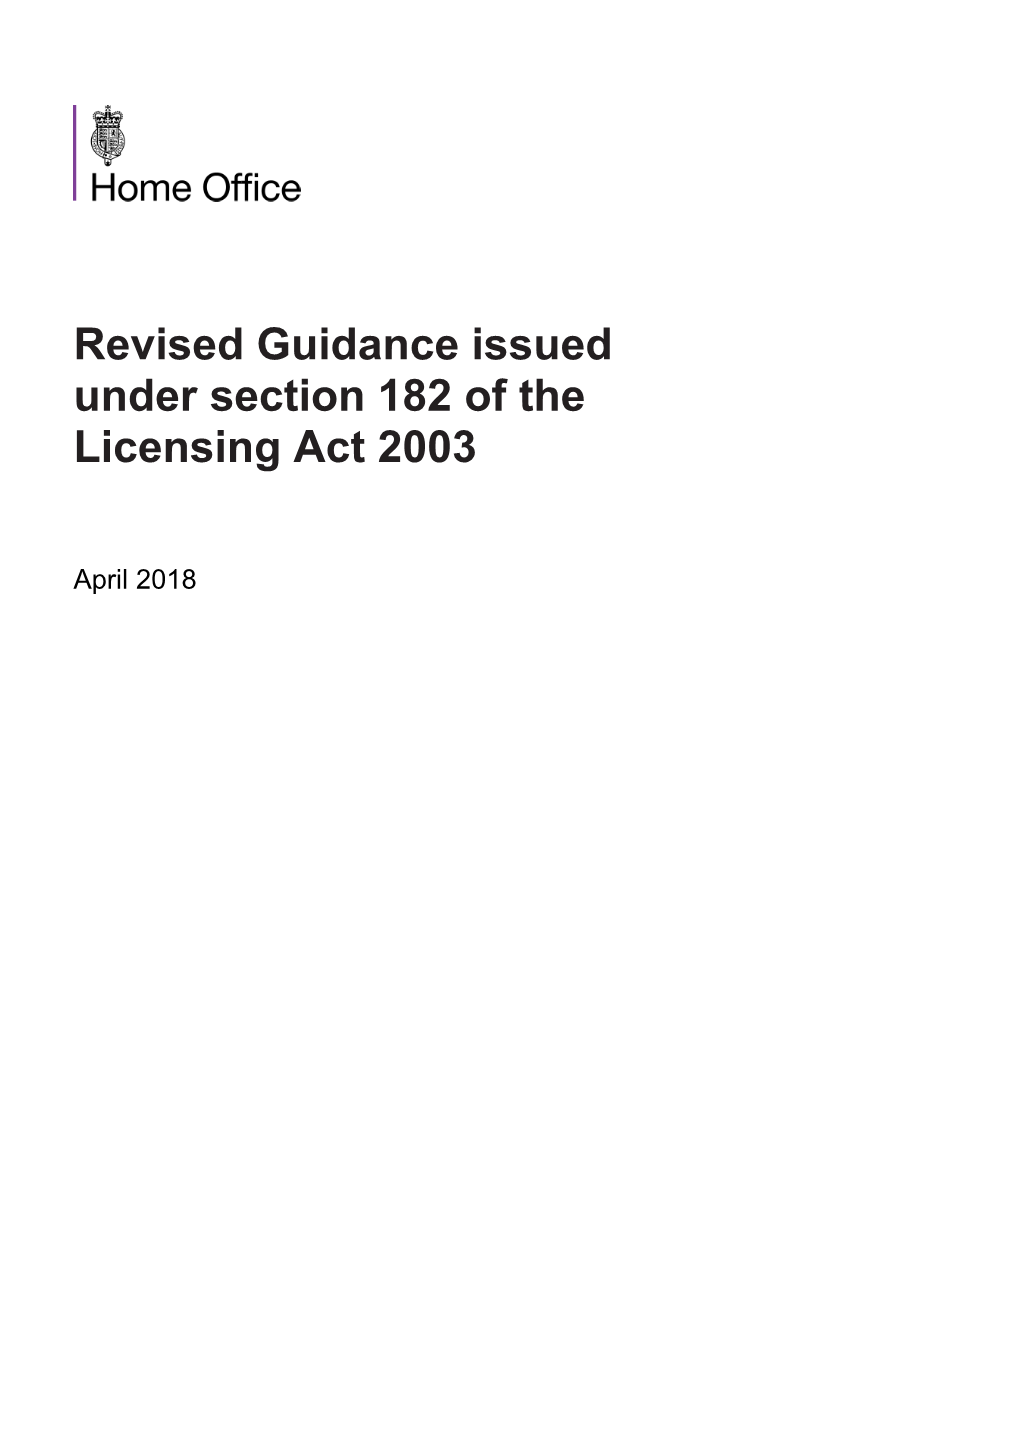 Revised Guidance Issued Under Section 182 of the Licensing Act 2003